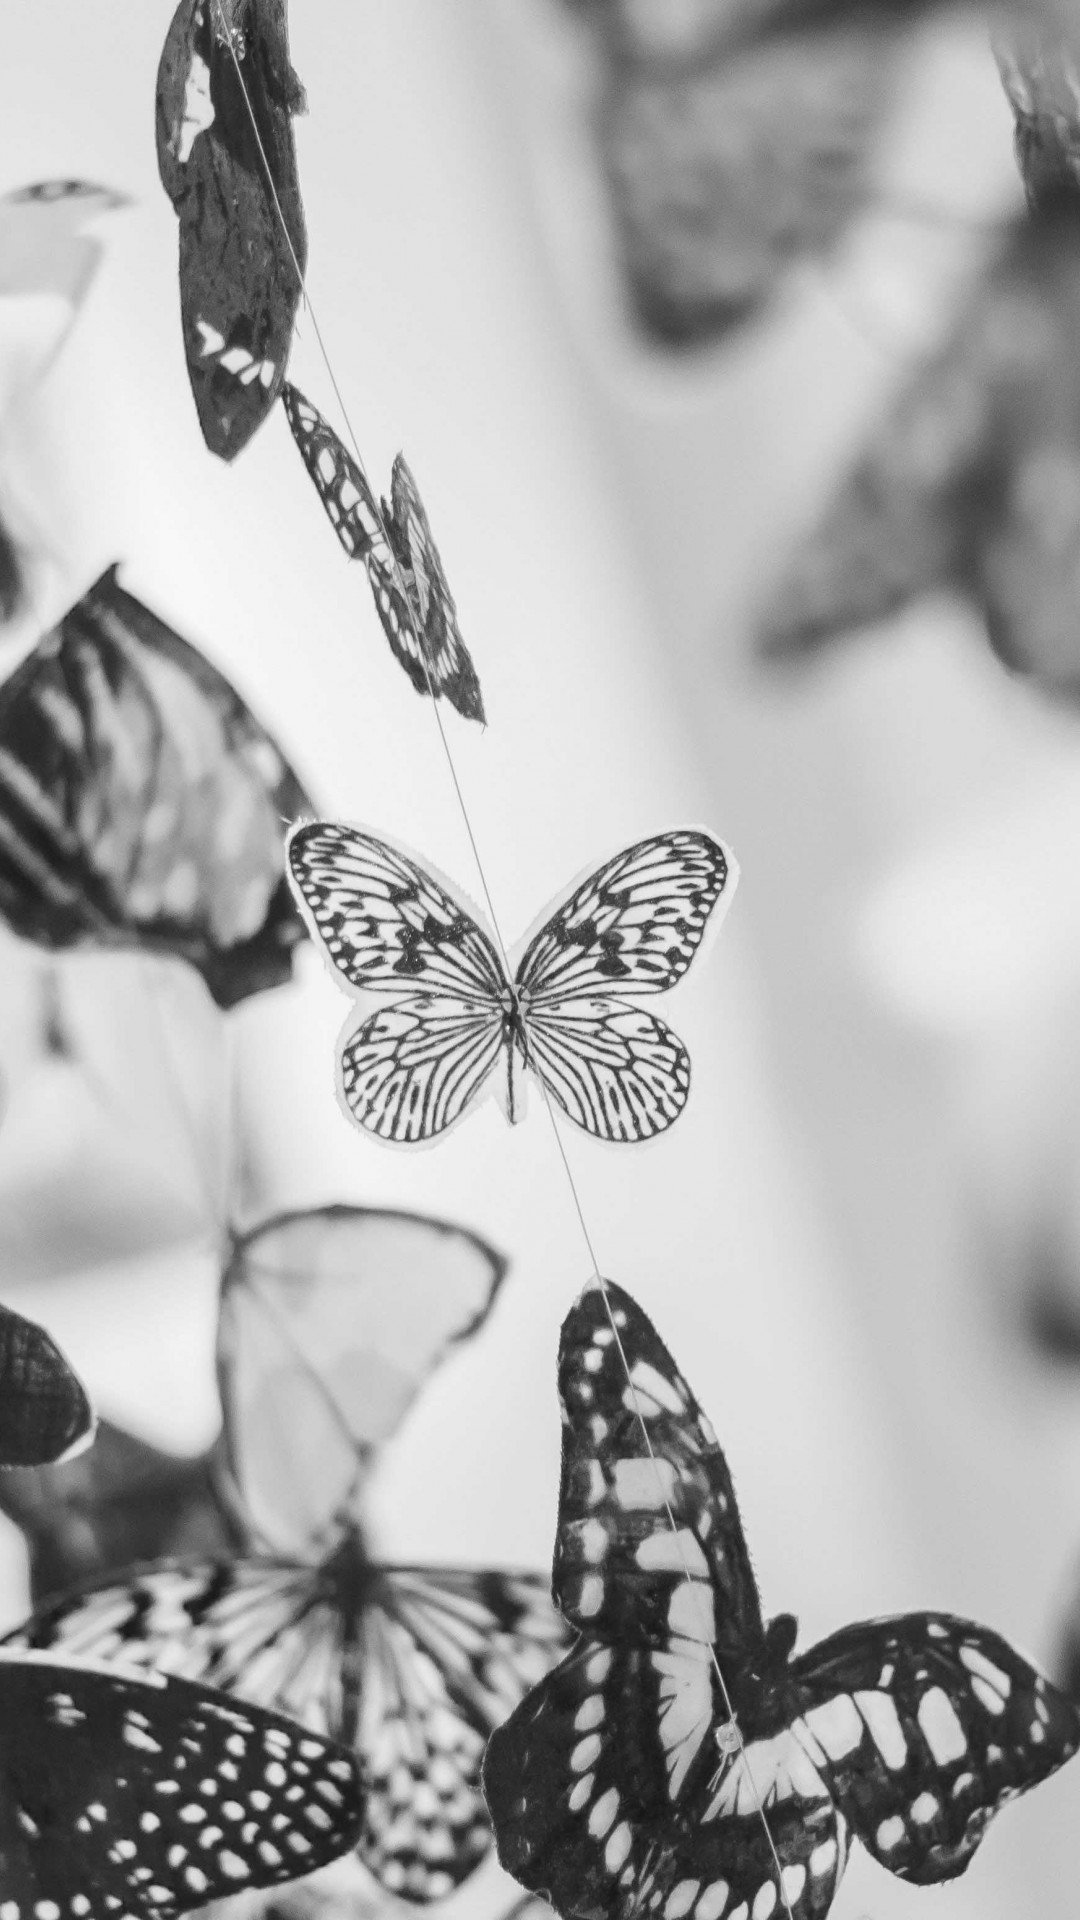 Colorful Beautiful Black and White Butterfly Wallpaper for Desktop and Mobiles iPhone 6 / 6S Plus